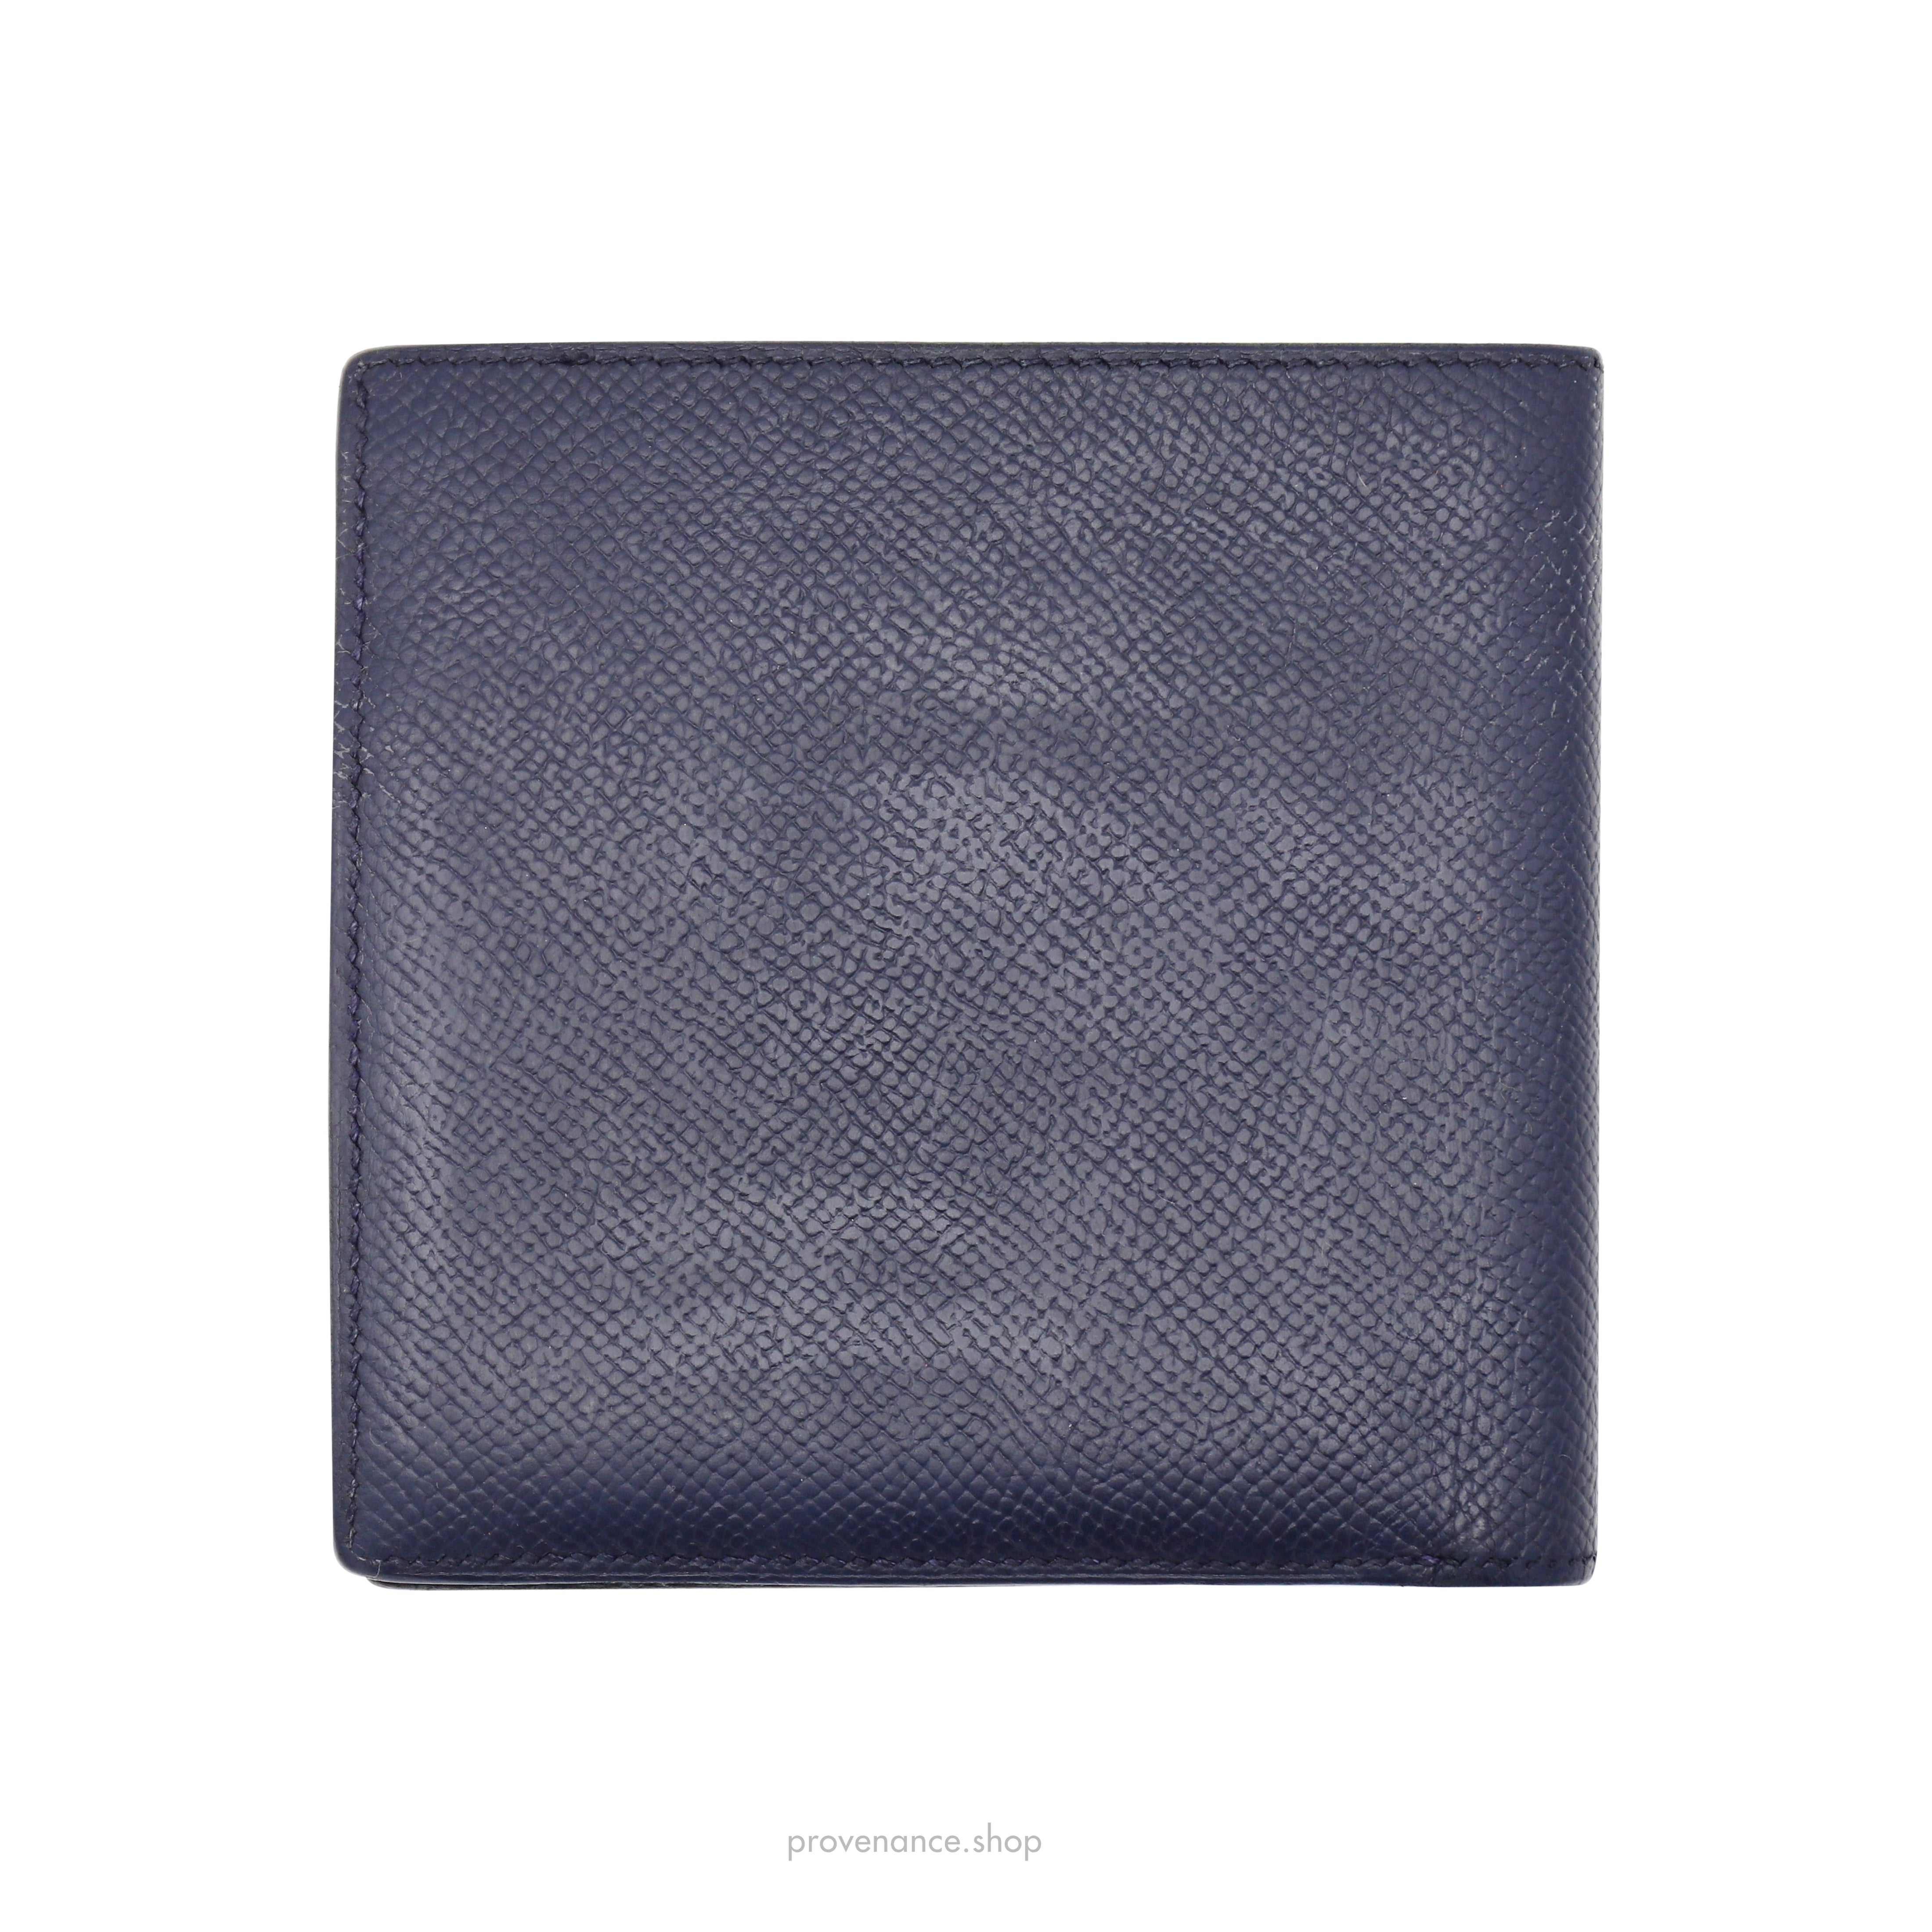 Epsom Leather Wallet 